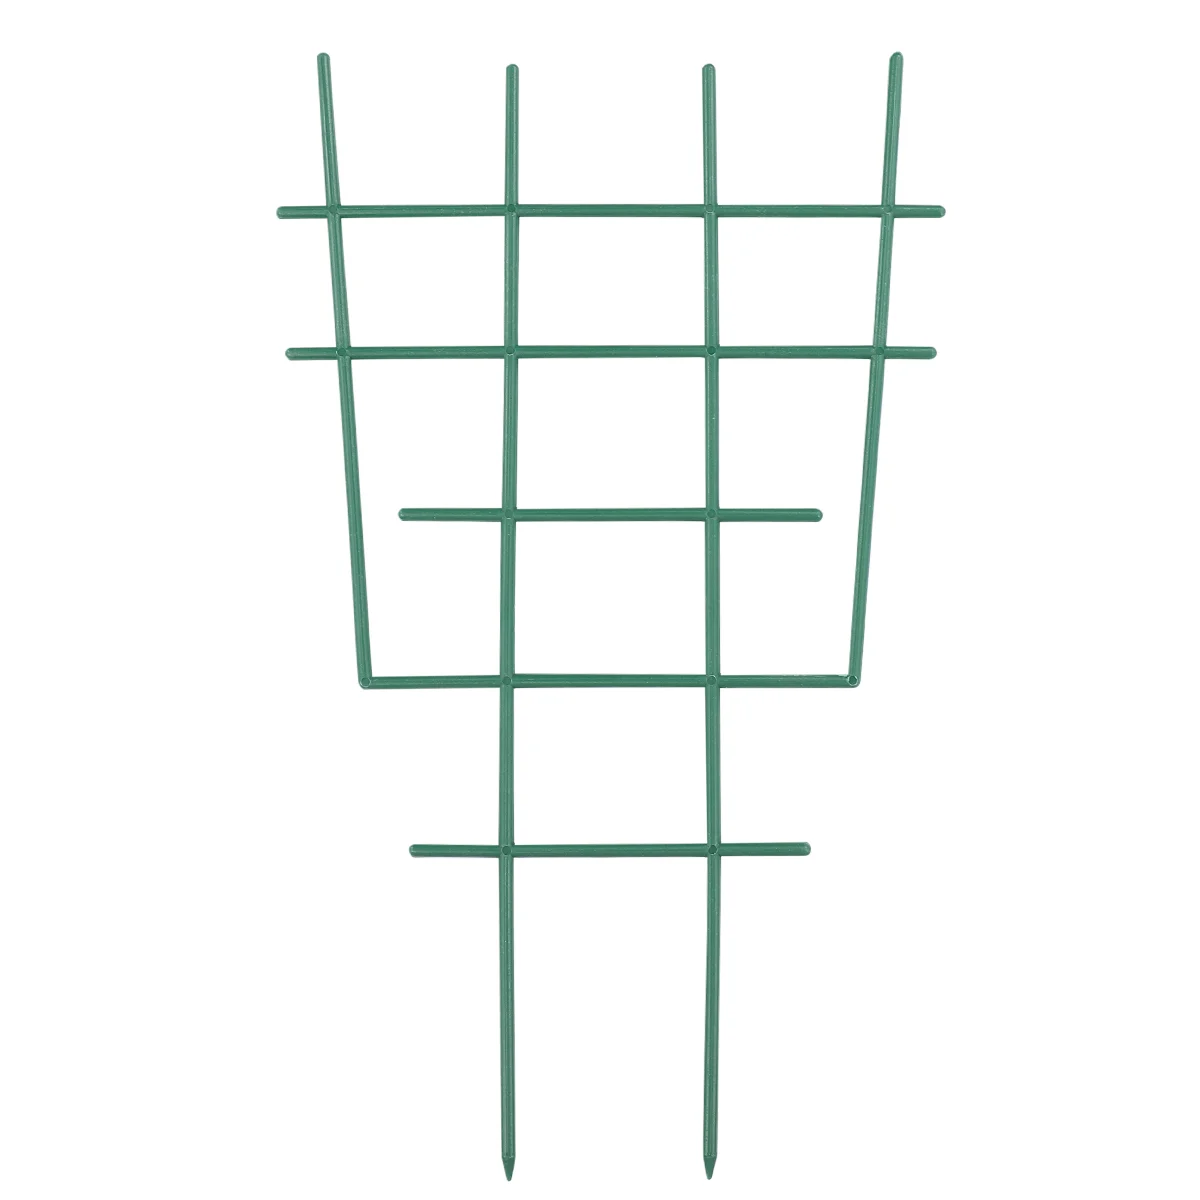 

DOITOOL 5 Pcs Plastic Garden Trellis Climbing Plants Support Cage Stand Extension Mesh for Flowers Gardening (Green)